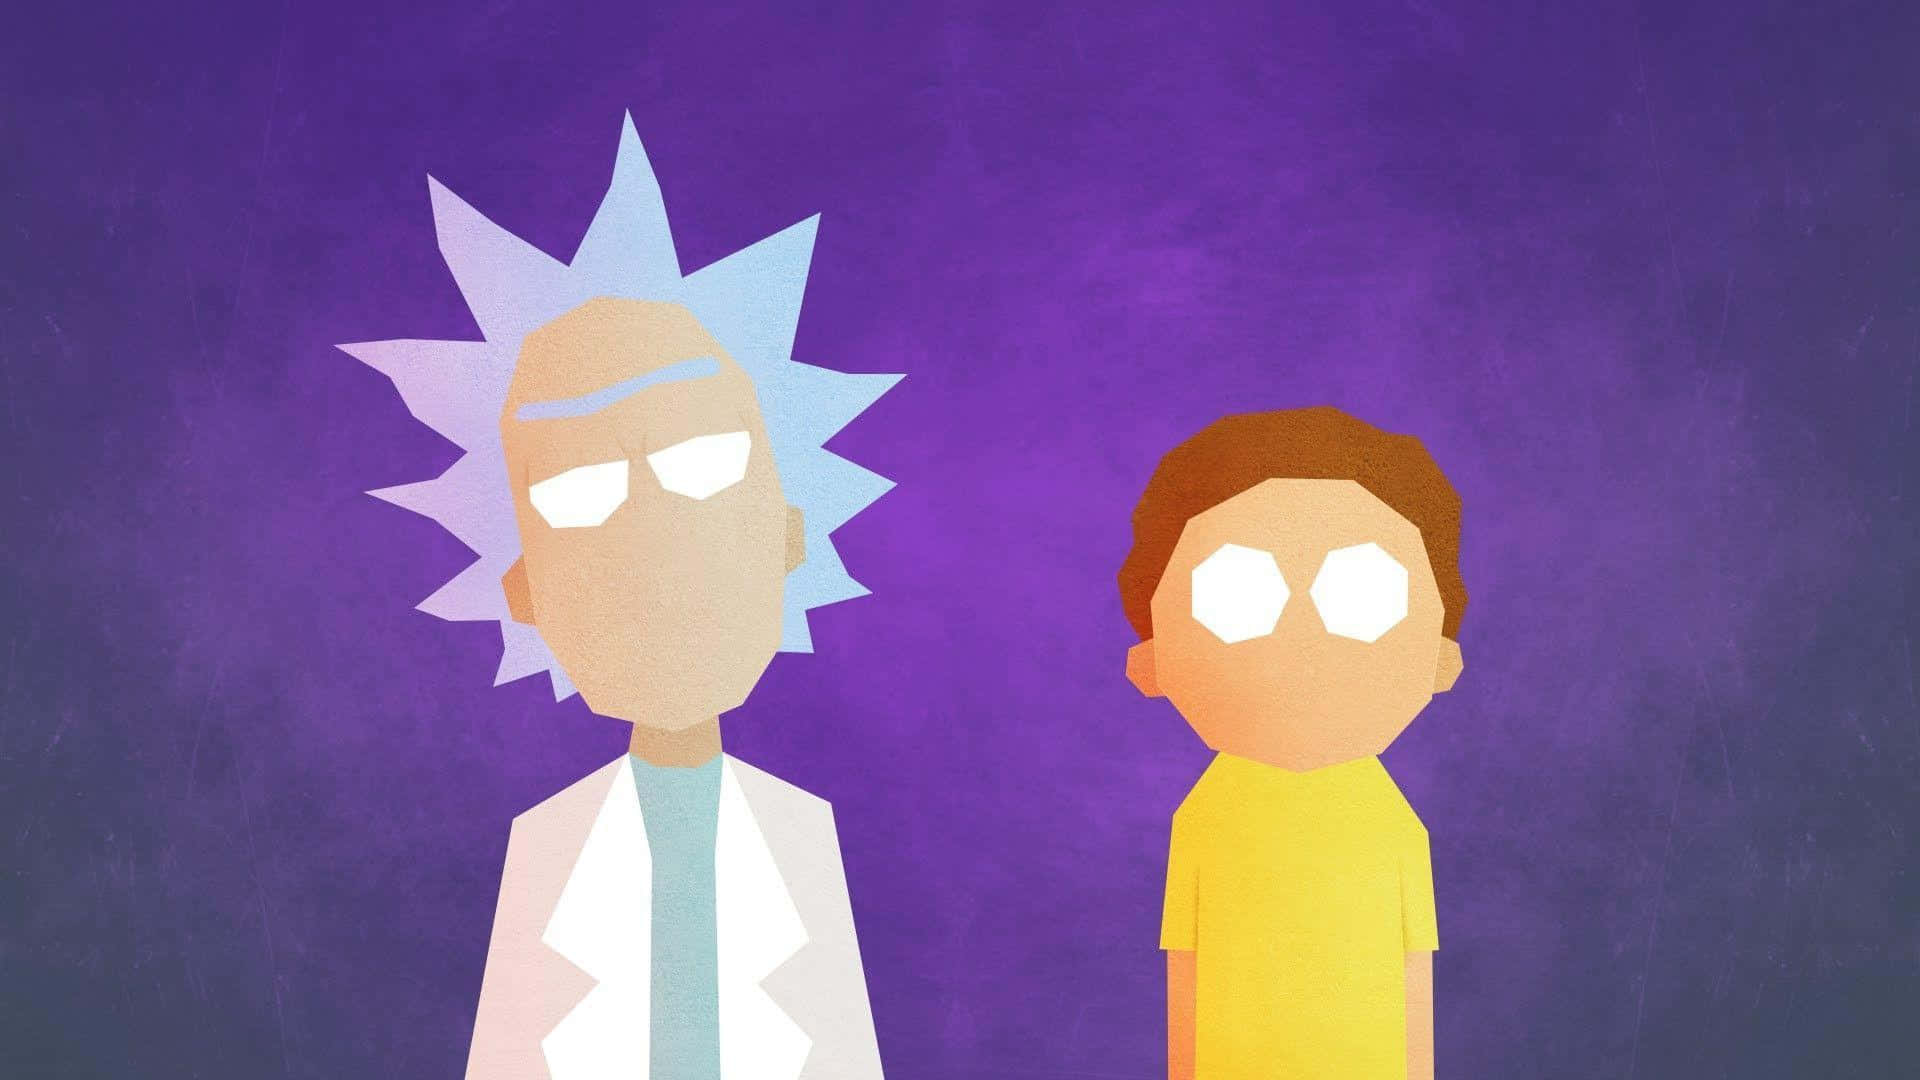 Join Rick and Morty on Their Hilarious Interdimensional Adventures Wallpaper